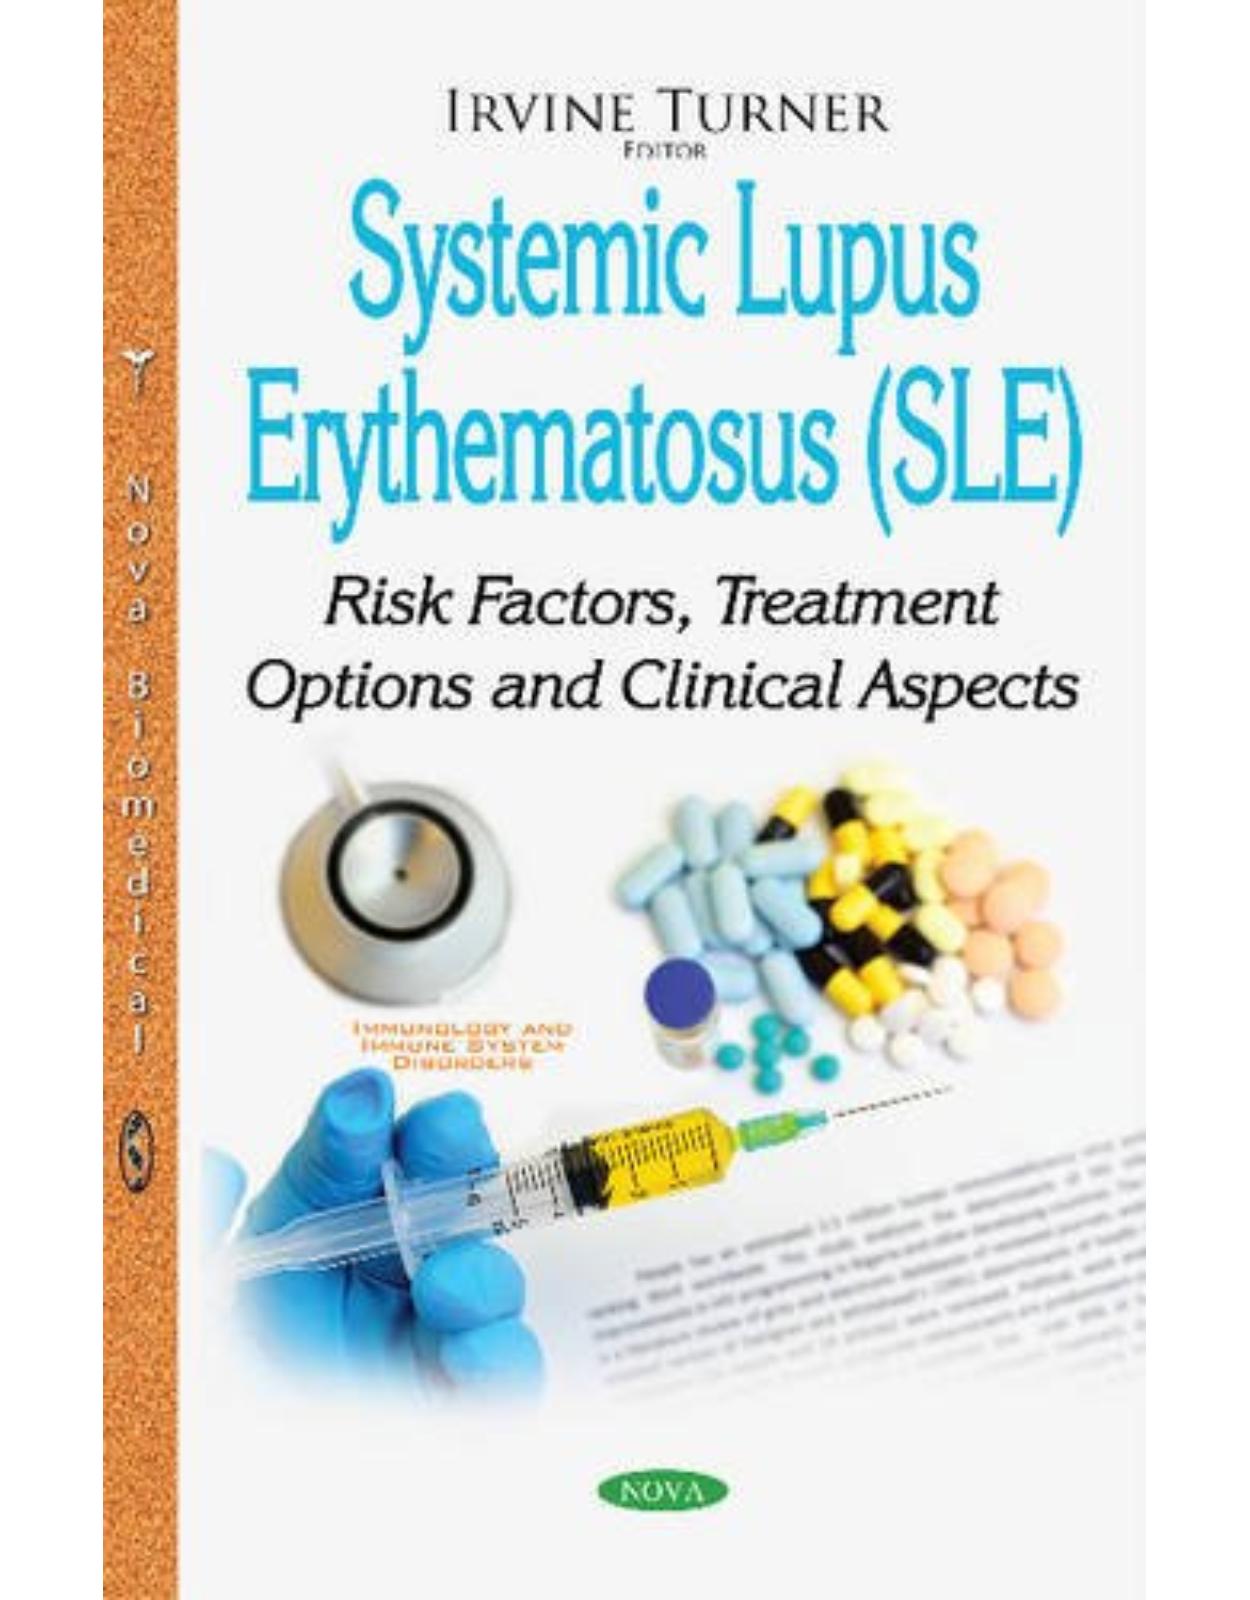 Systemic Lupus Erythematosus (SLE): Risk Factors, Treatment Options & Clinical Aspects